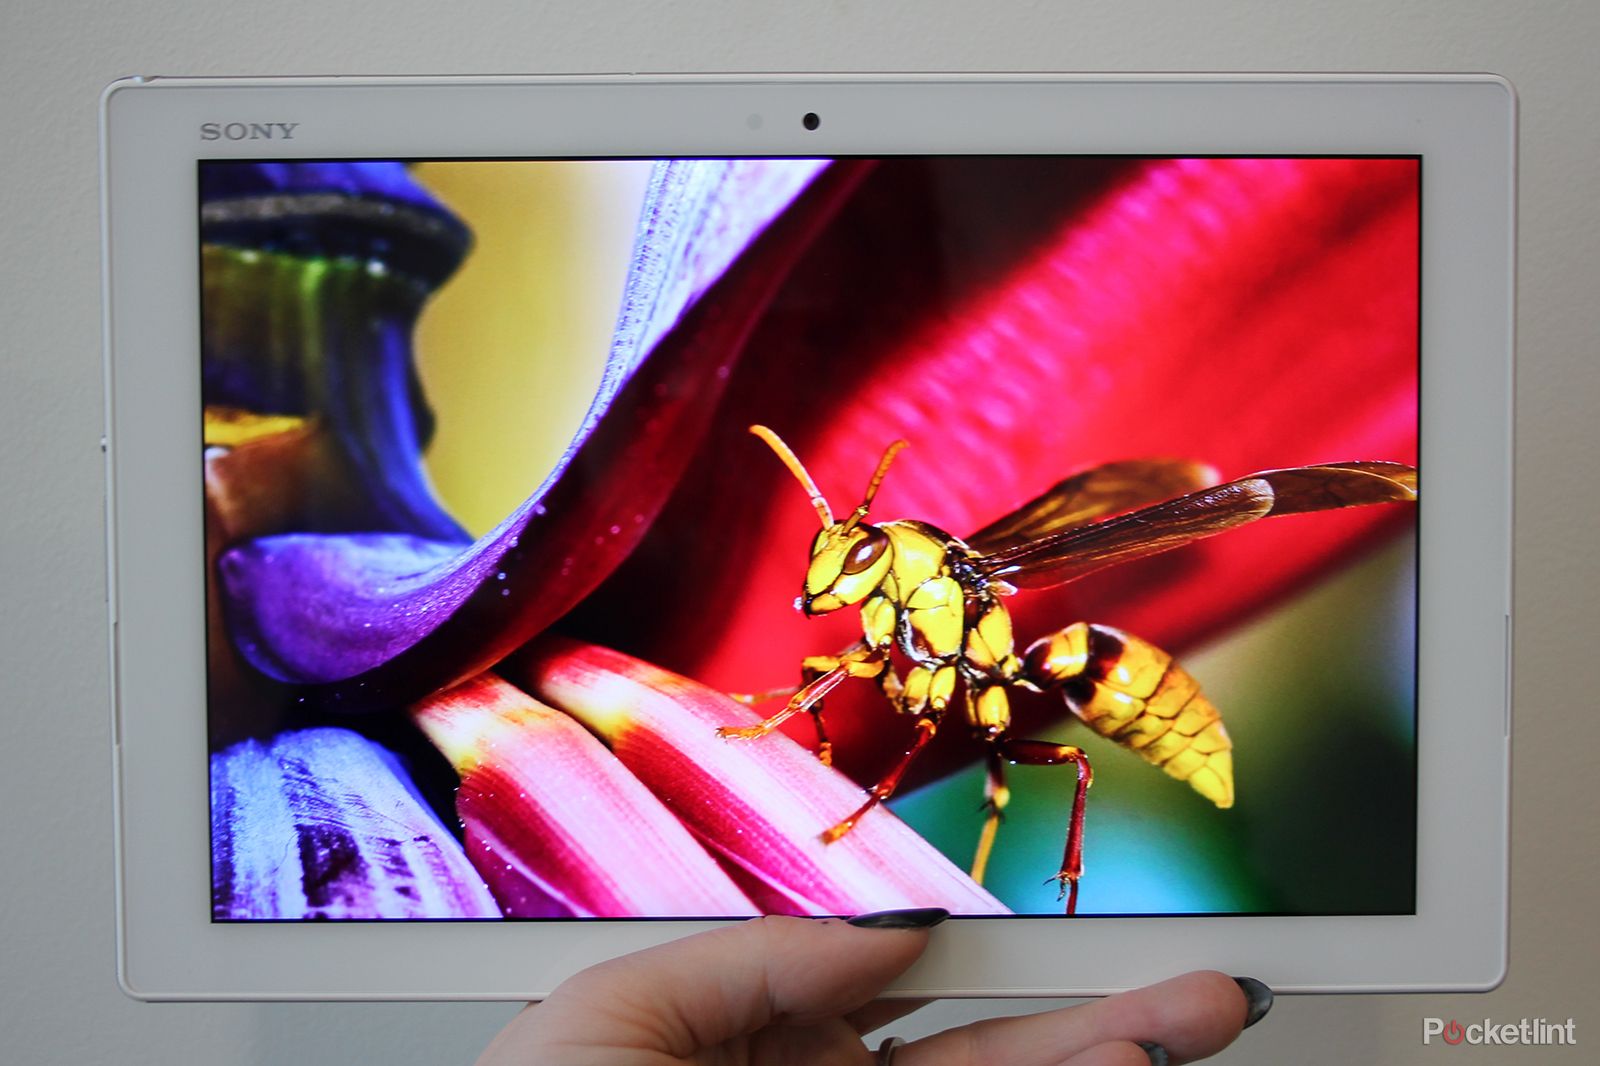 sony xperia z4 tablet hands on slimmer lighter and sexier image 1